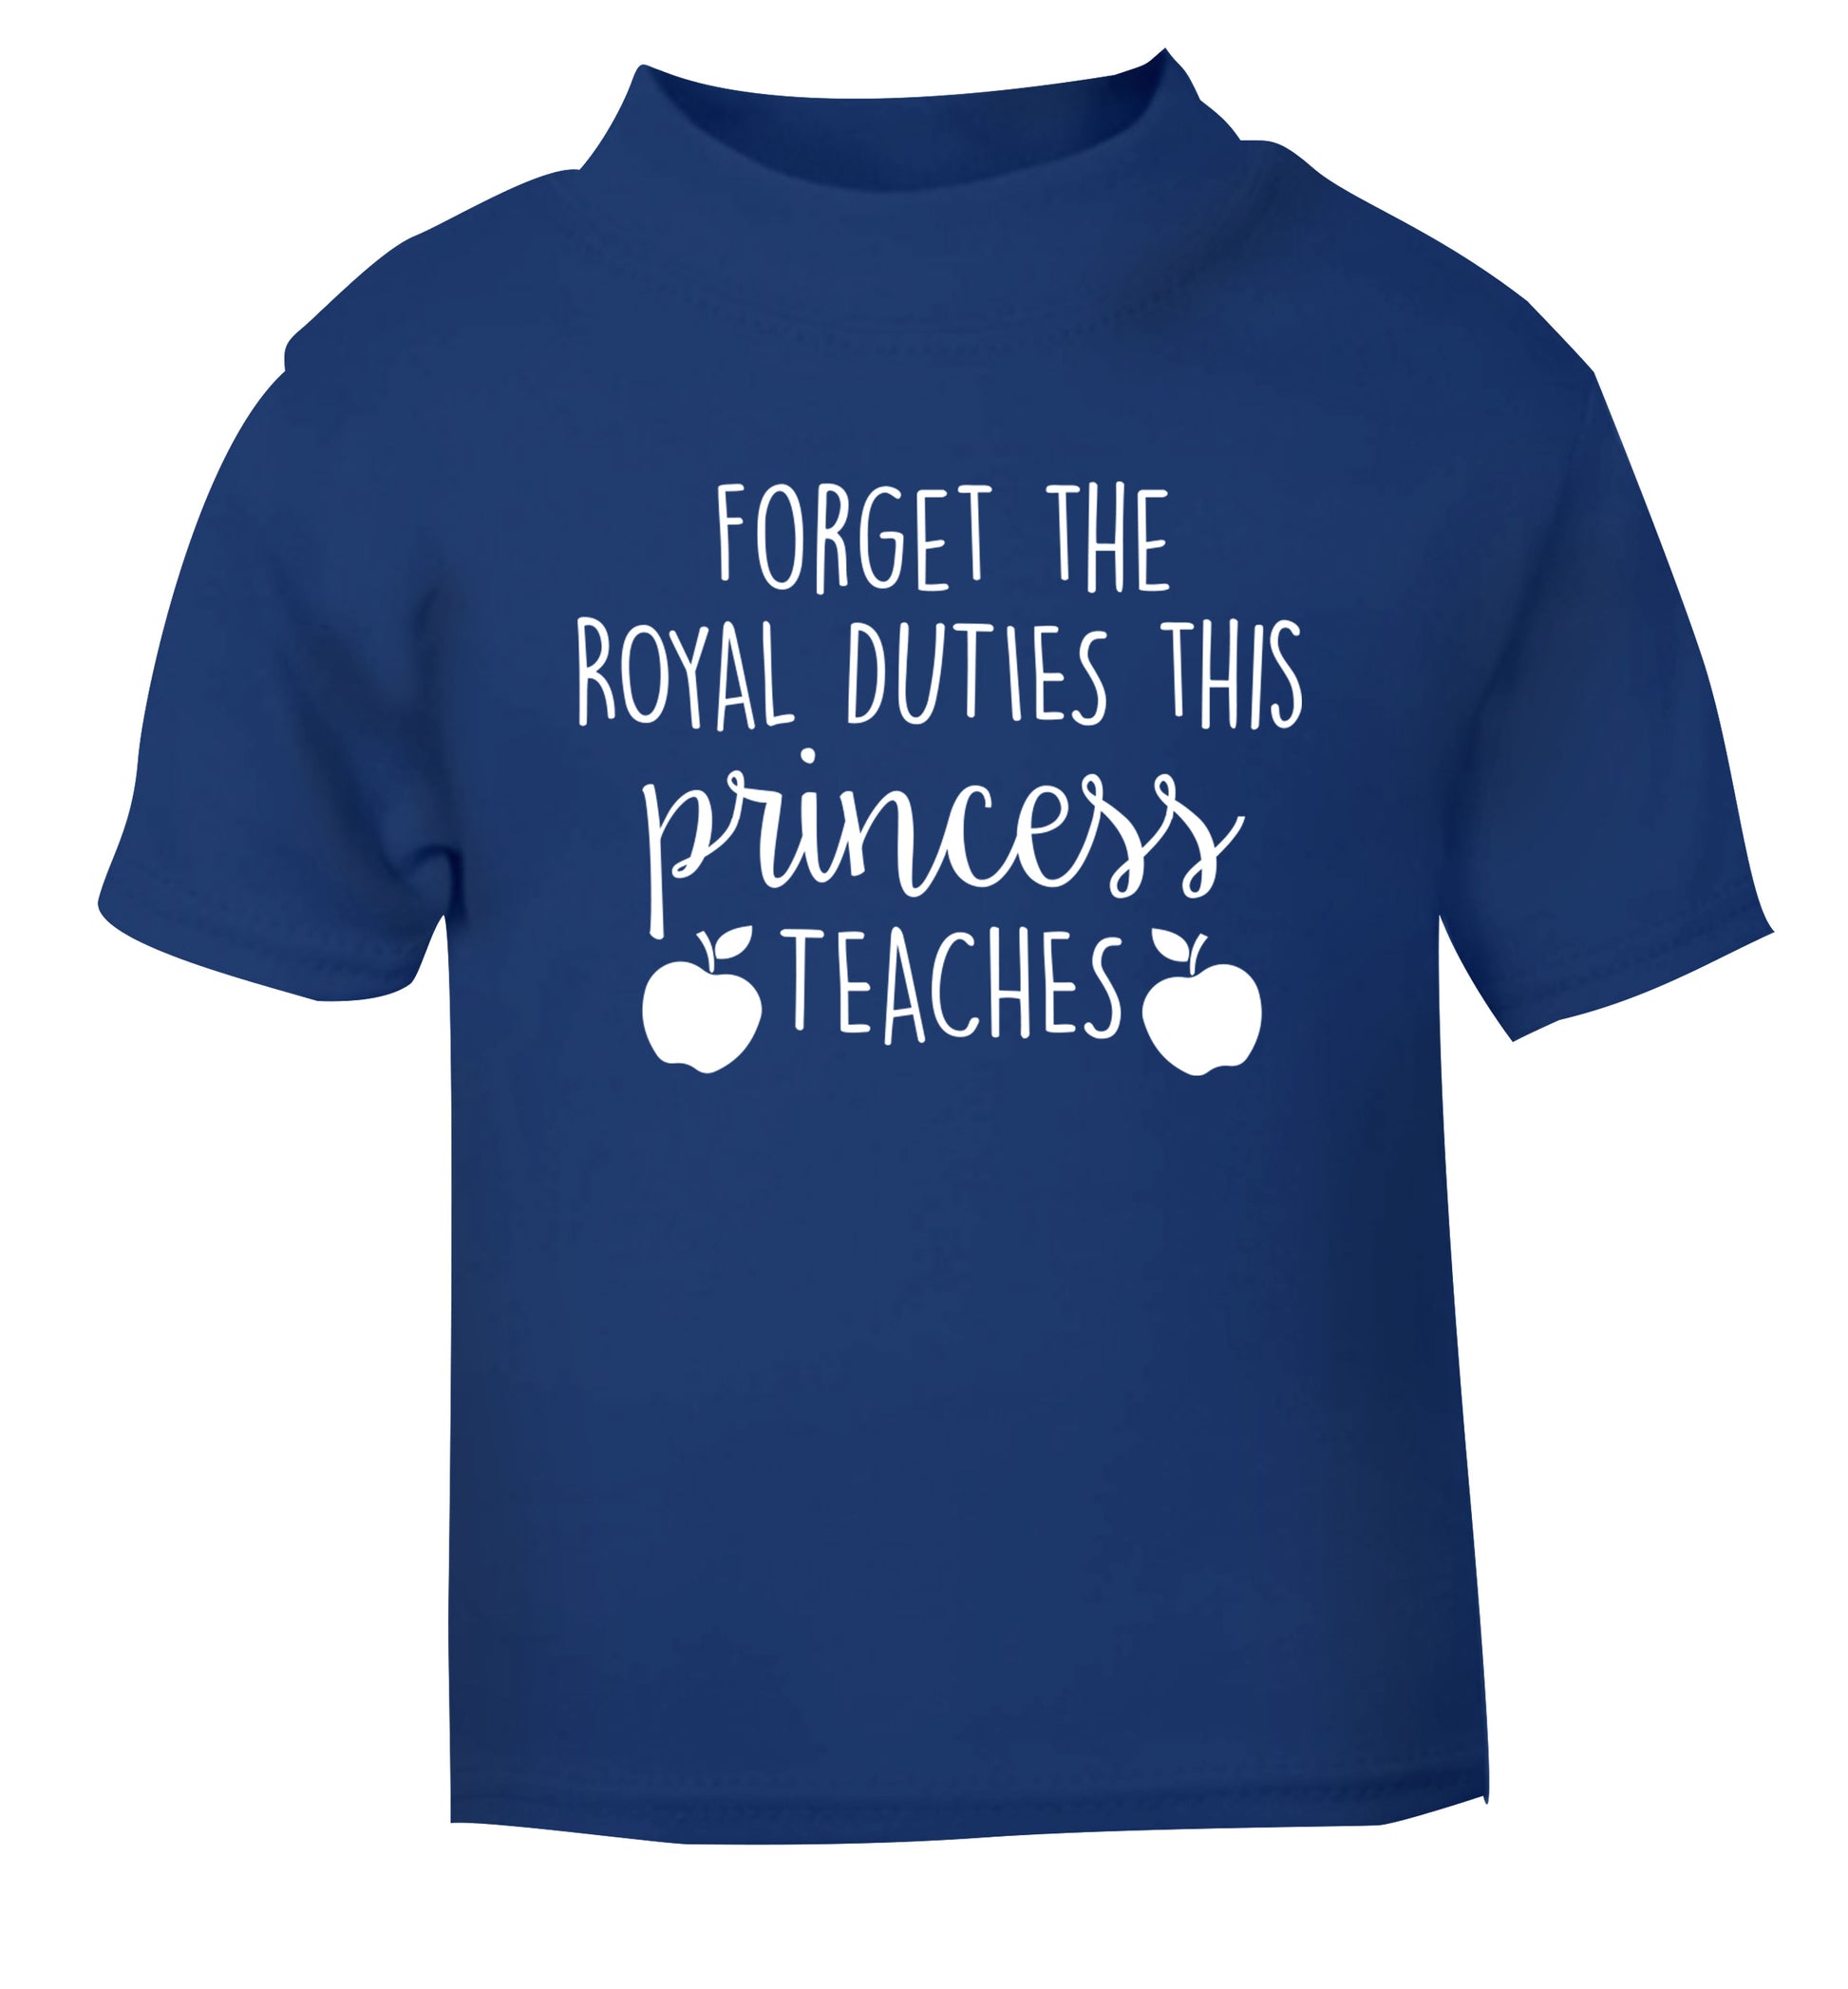 Forget the royal duties this princess teaches blue Baby Toddler Tshirt 2 Years